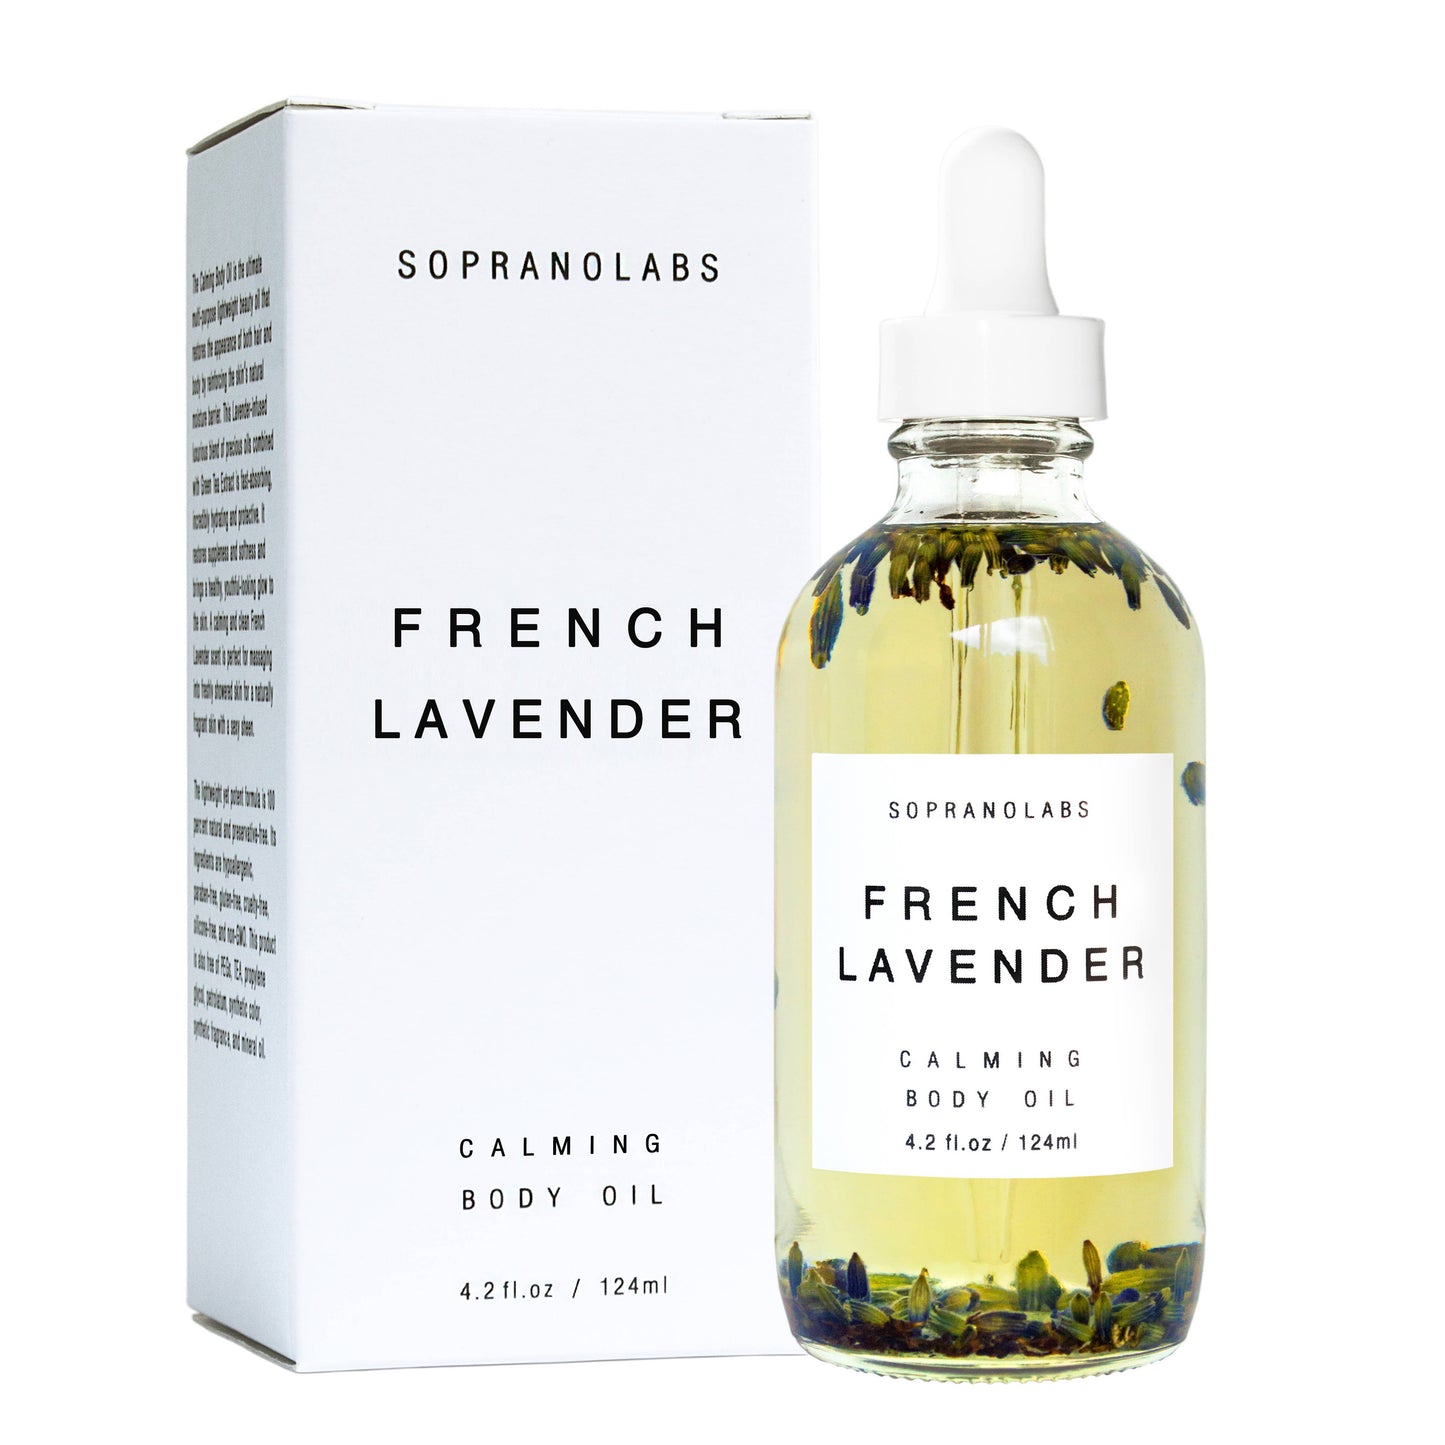 French Lavender Calming Body Oil. SPA Gift for her